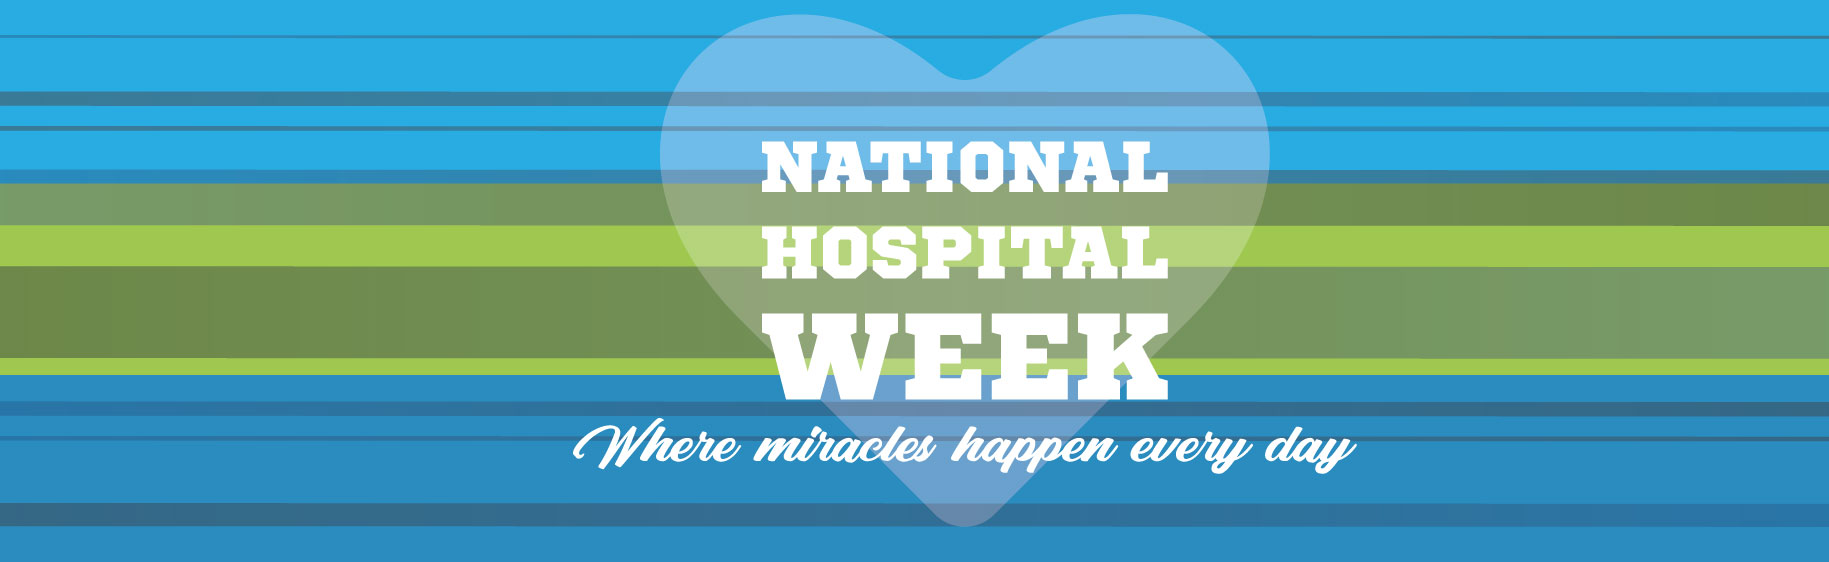 NATIONAL HOSPITAL WEEK
Where miracles happen every day